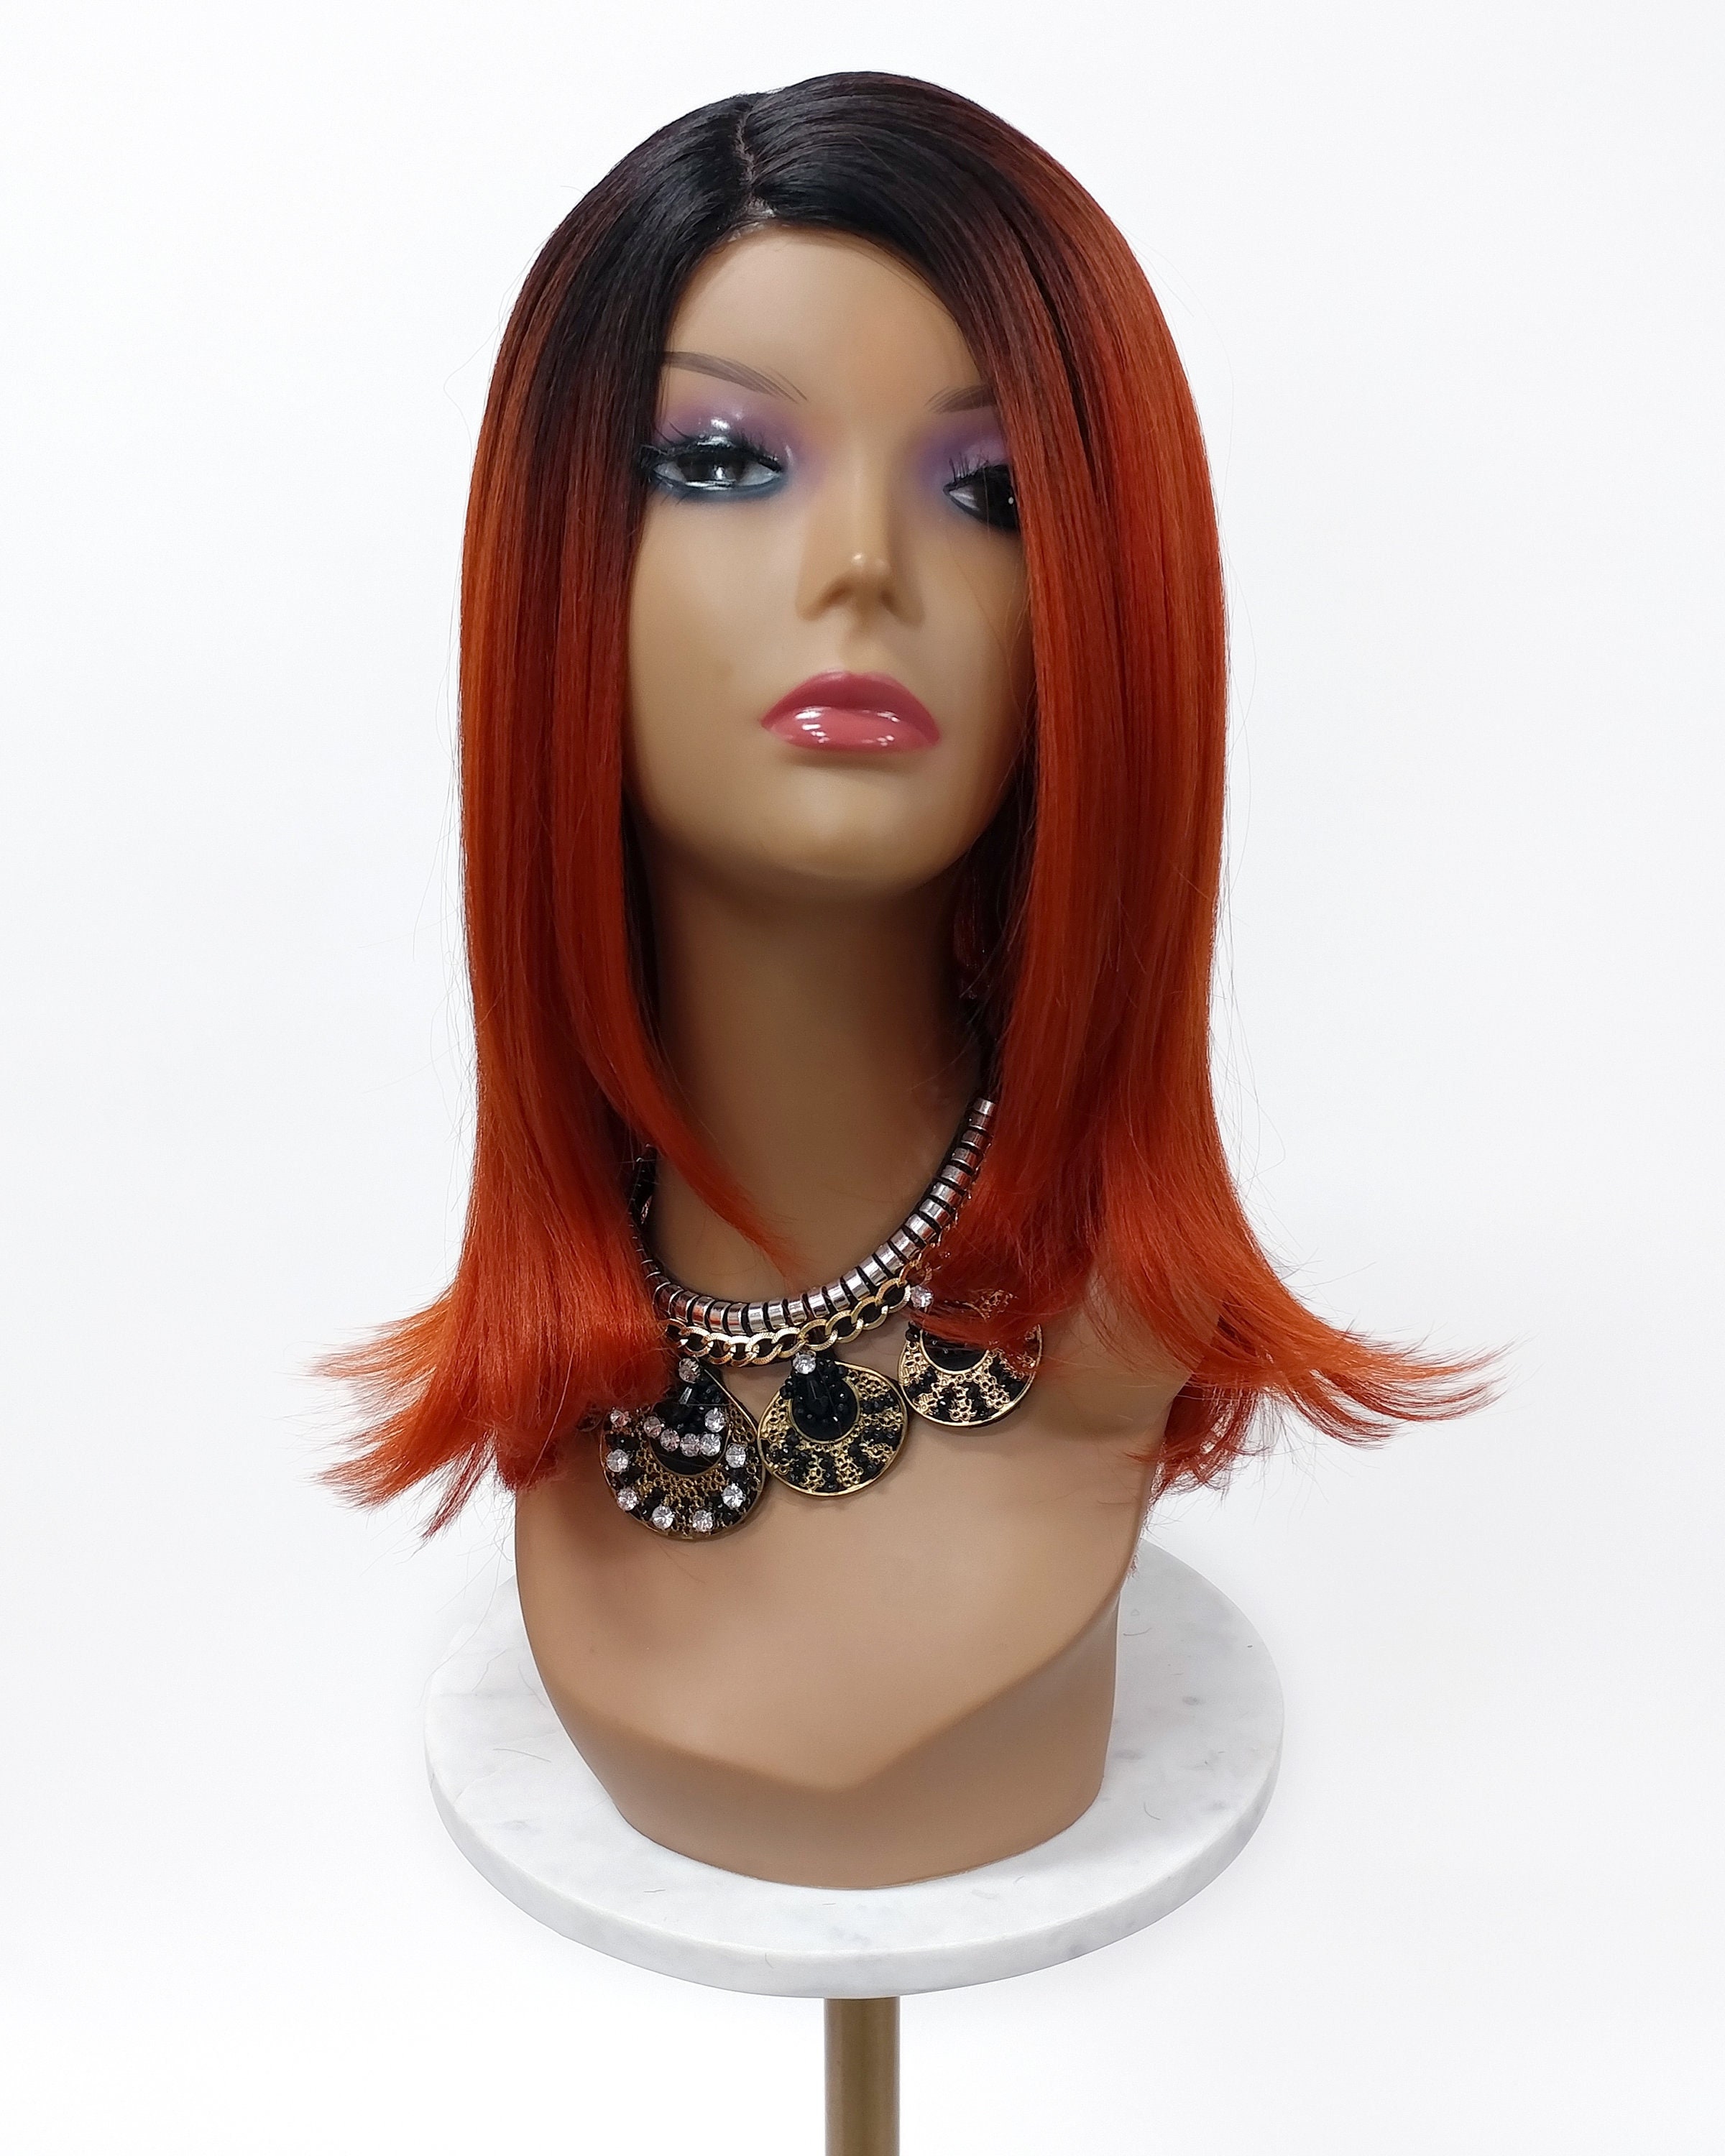 How to Properly Secure and Adjust a Pre-Cut Lace Wigs for a Perfect Fit?